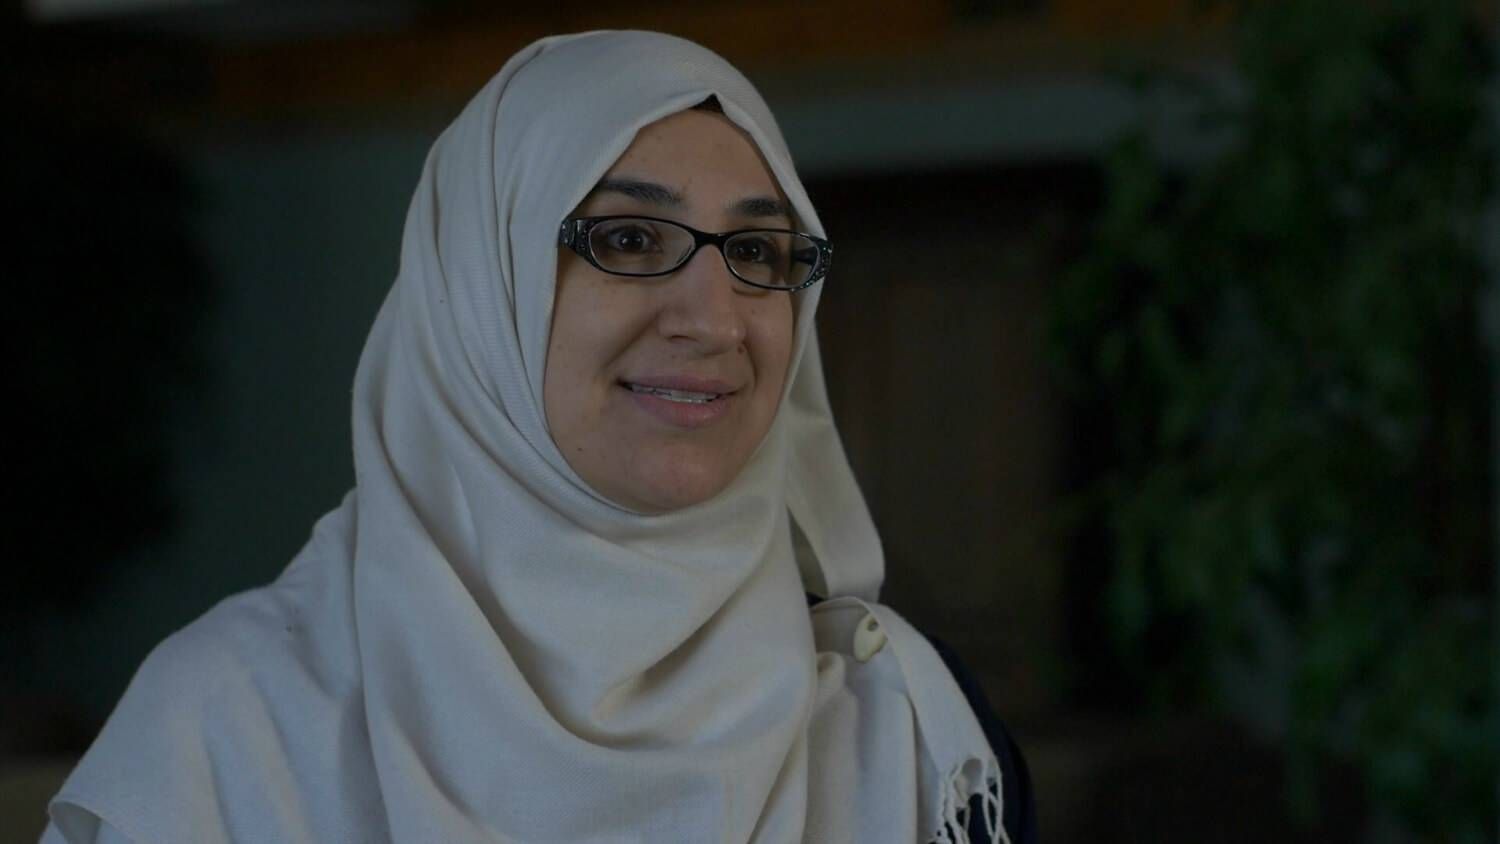 Muslim Shero Danyal Masoud Encourages Youth to Make a Difference